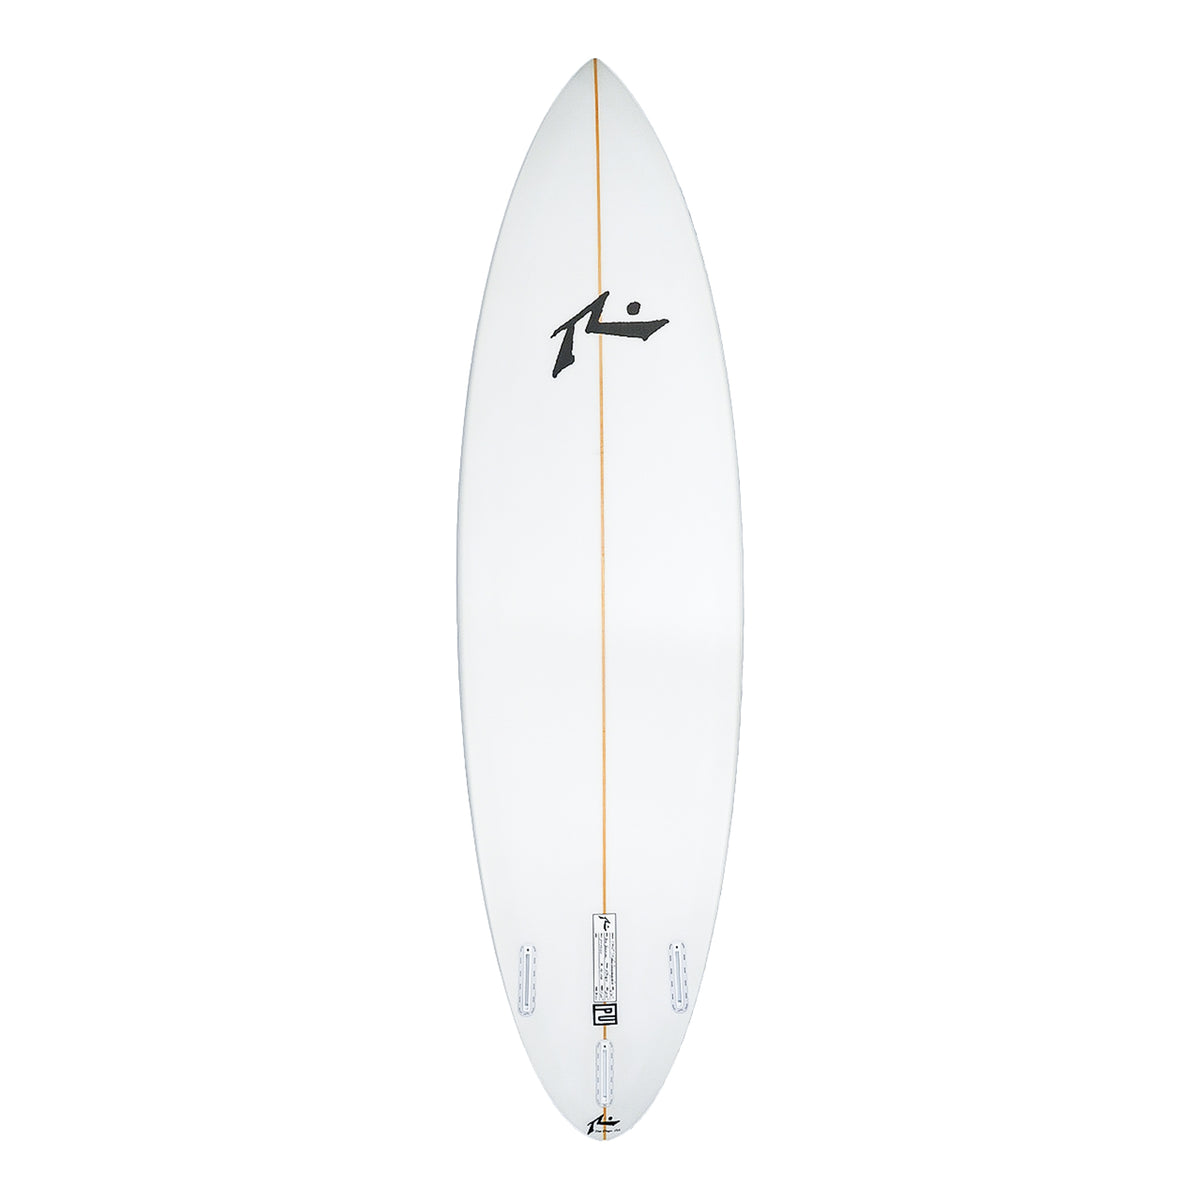 New Traveler - Made To Order - Step Up - Rusty Surfboards - Bottom View